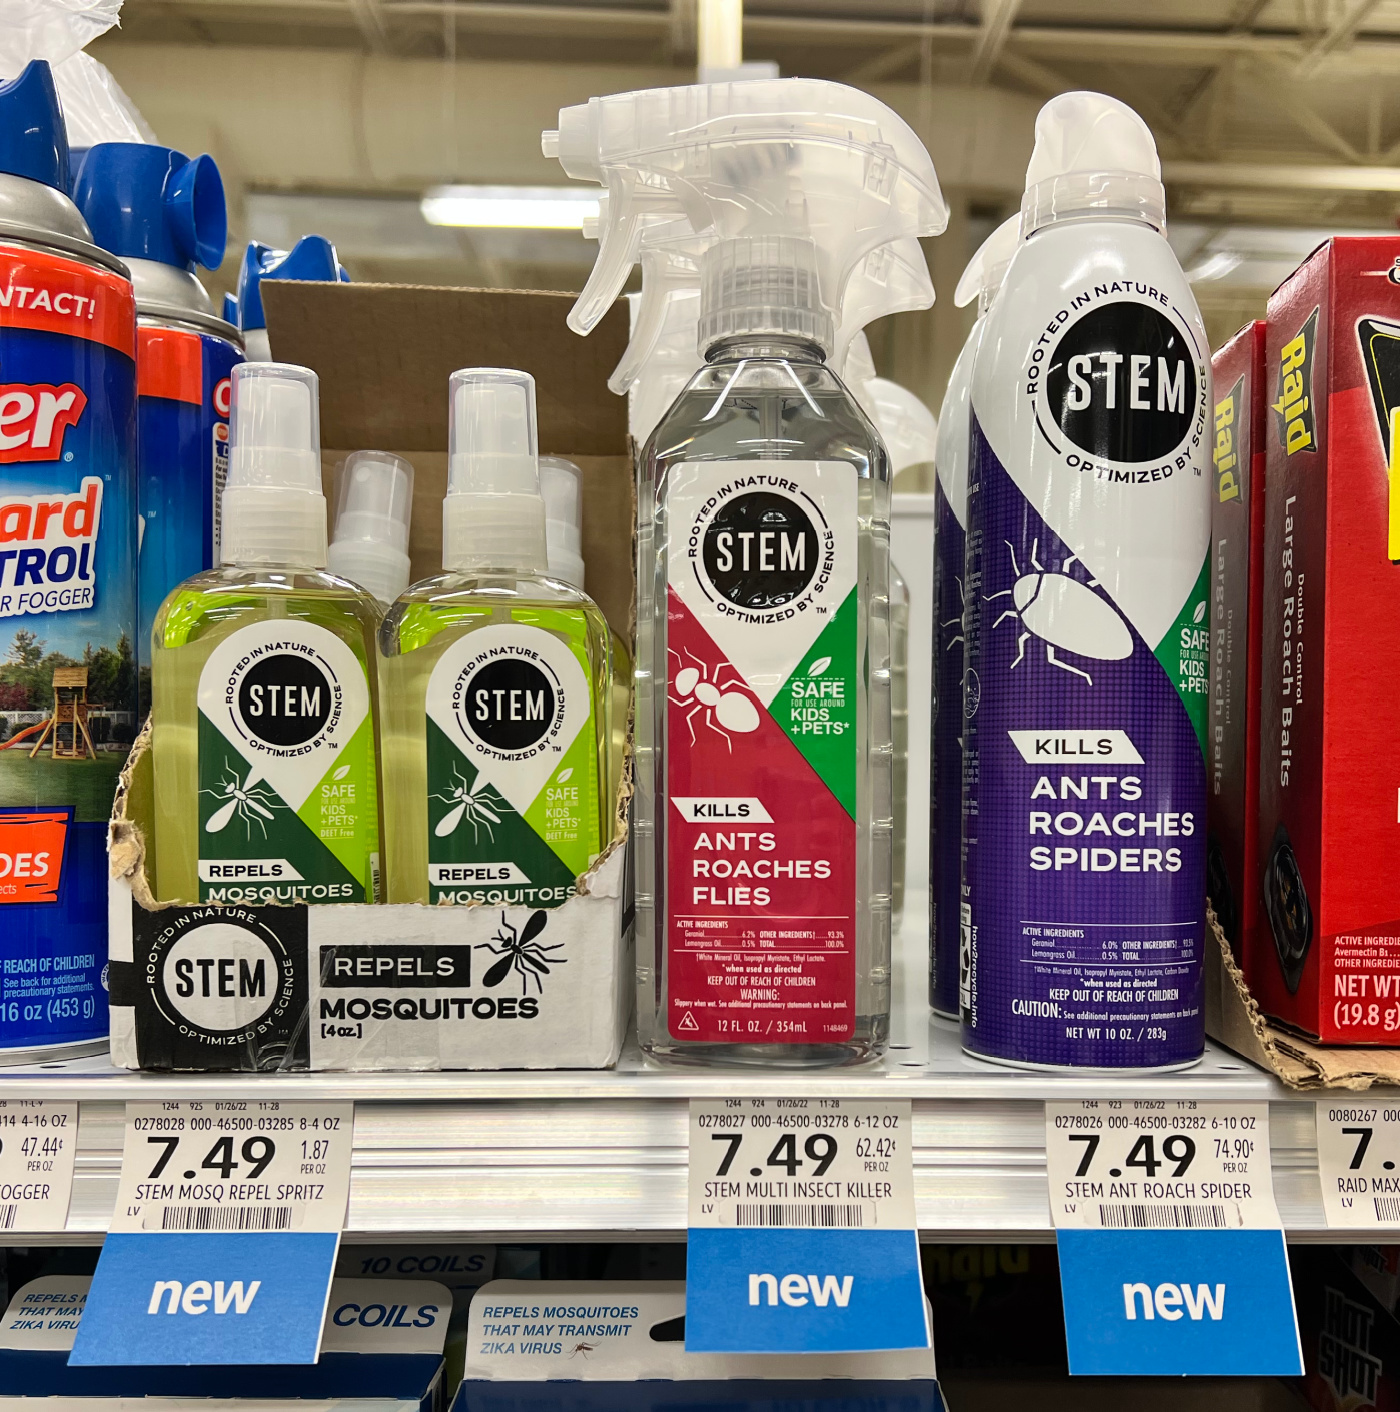 Stem For Bugs Products Now At Publix - Protect Your Home From Pest on I Heart Publix